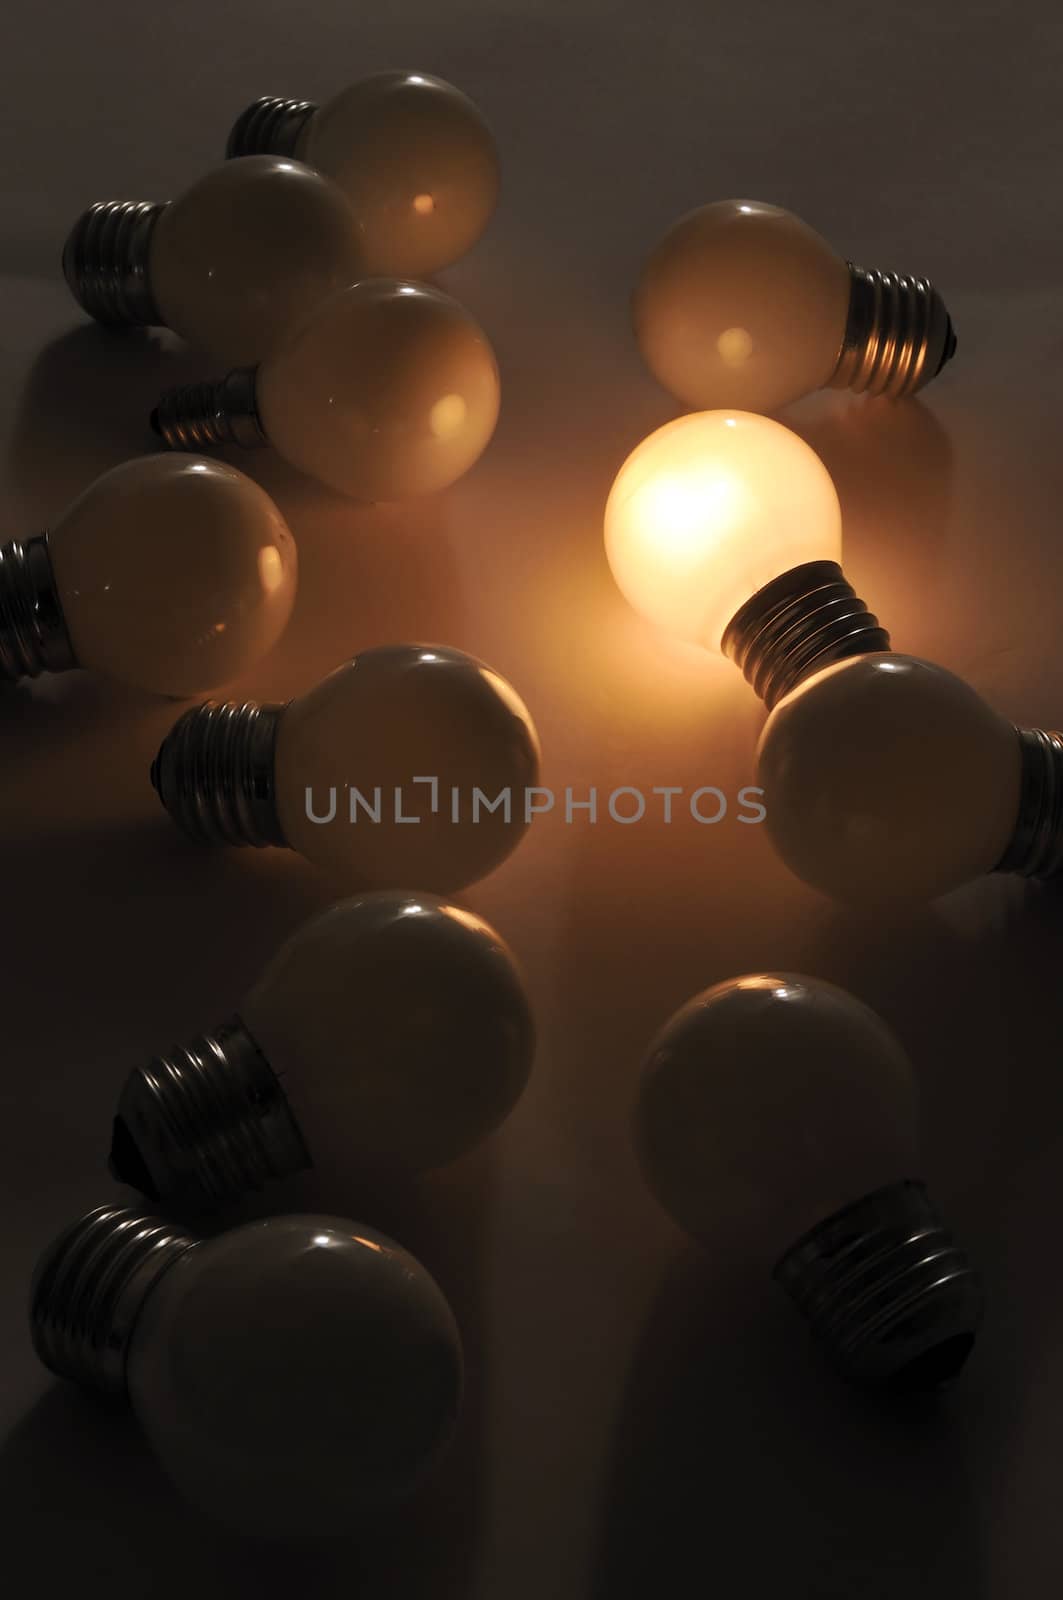 A figurative picture of light bulbs. One bright burning bulb with dull lamps. One bright mind/idea in a crowd.